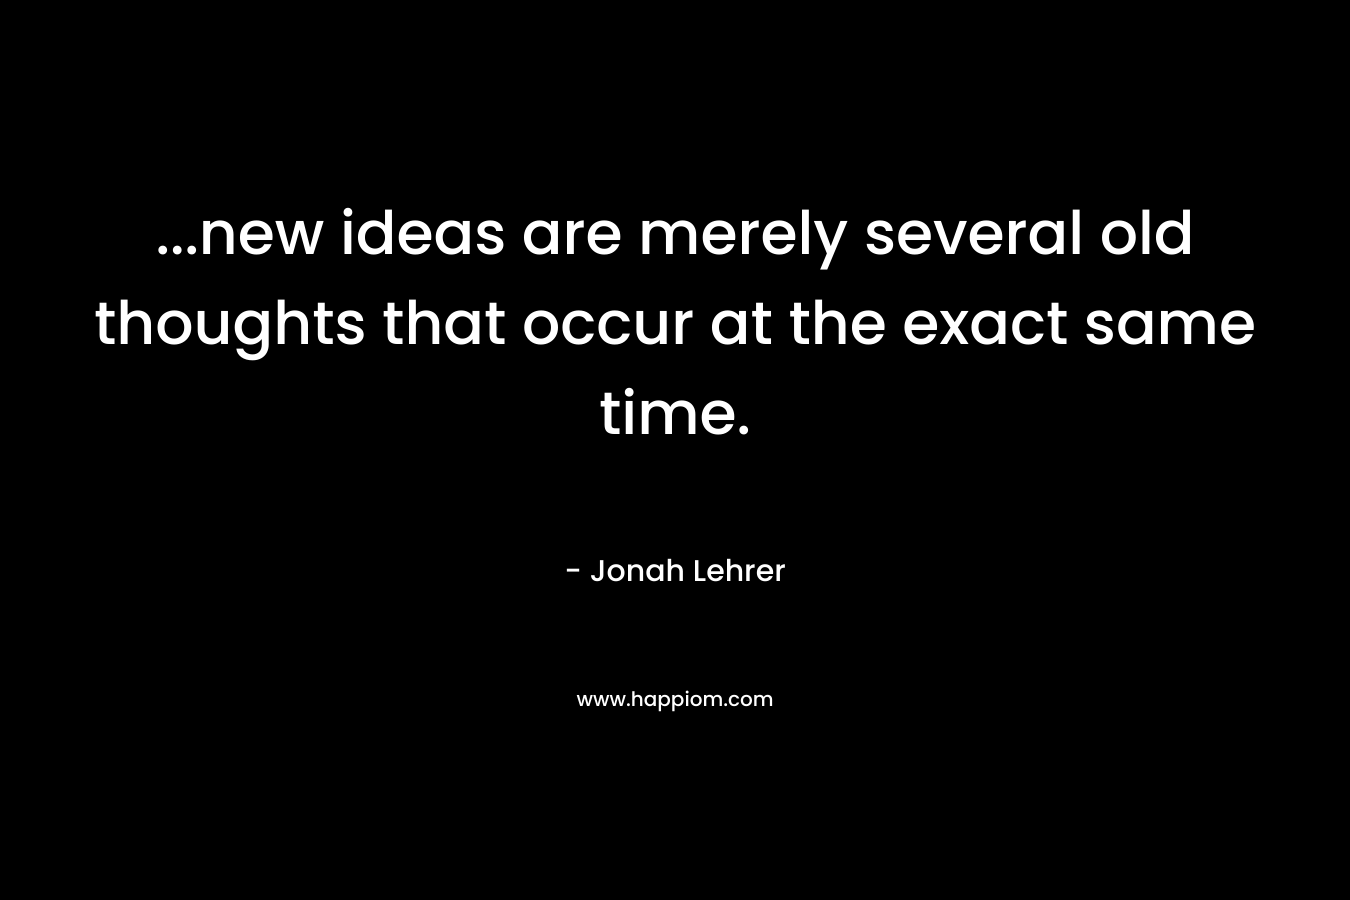 …new ideas are merely several old thoughts that occur at the exact same time. – Jonah Lehrer